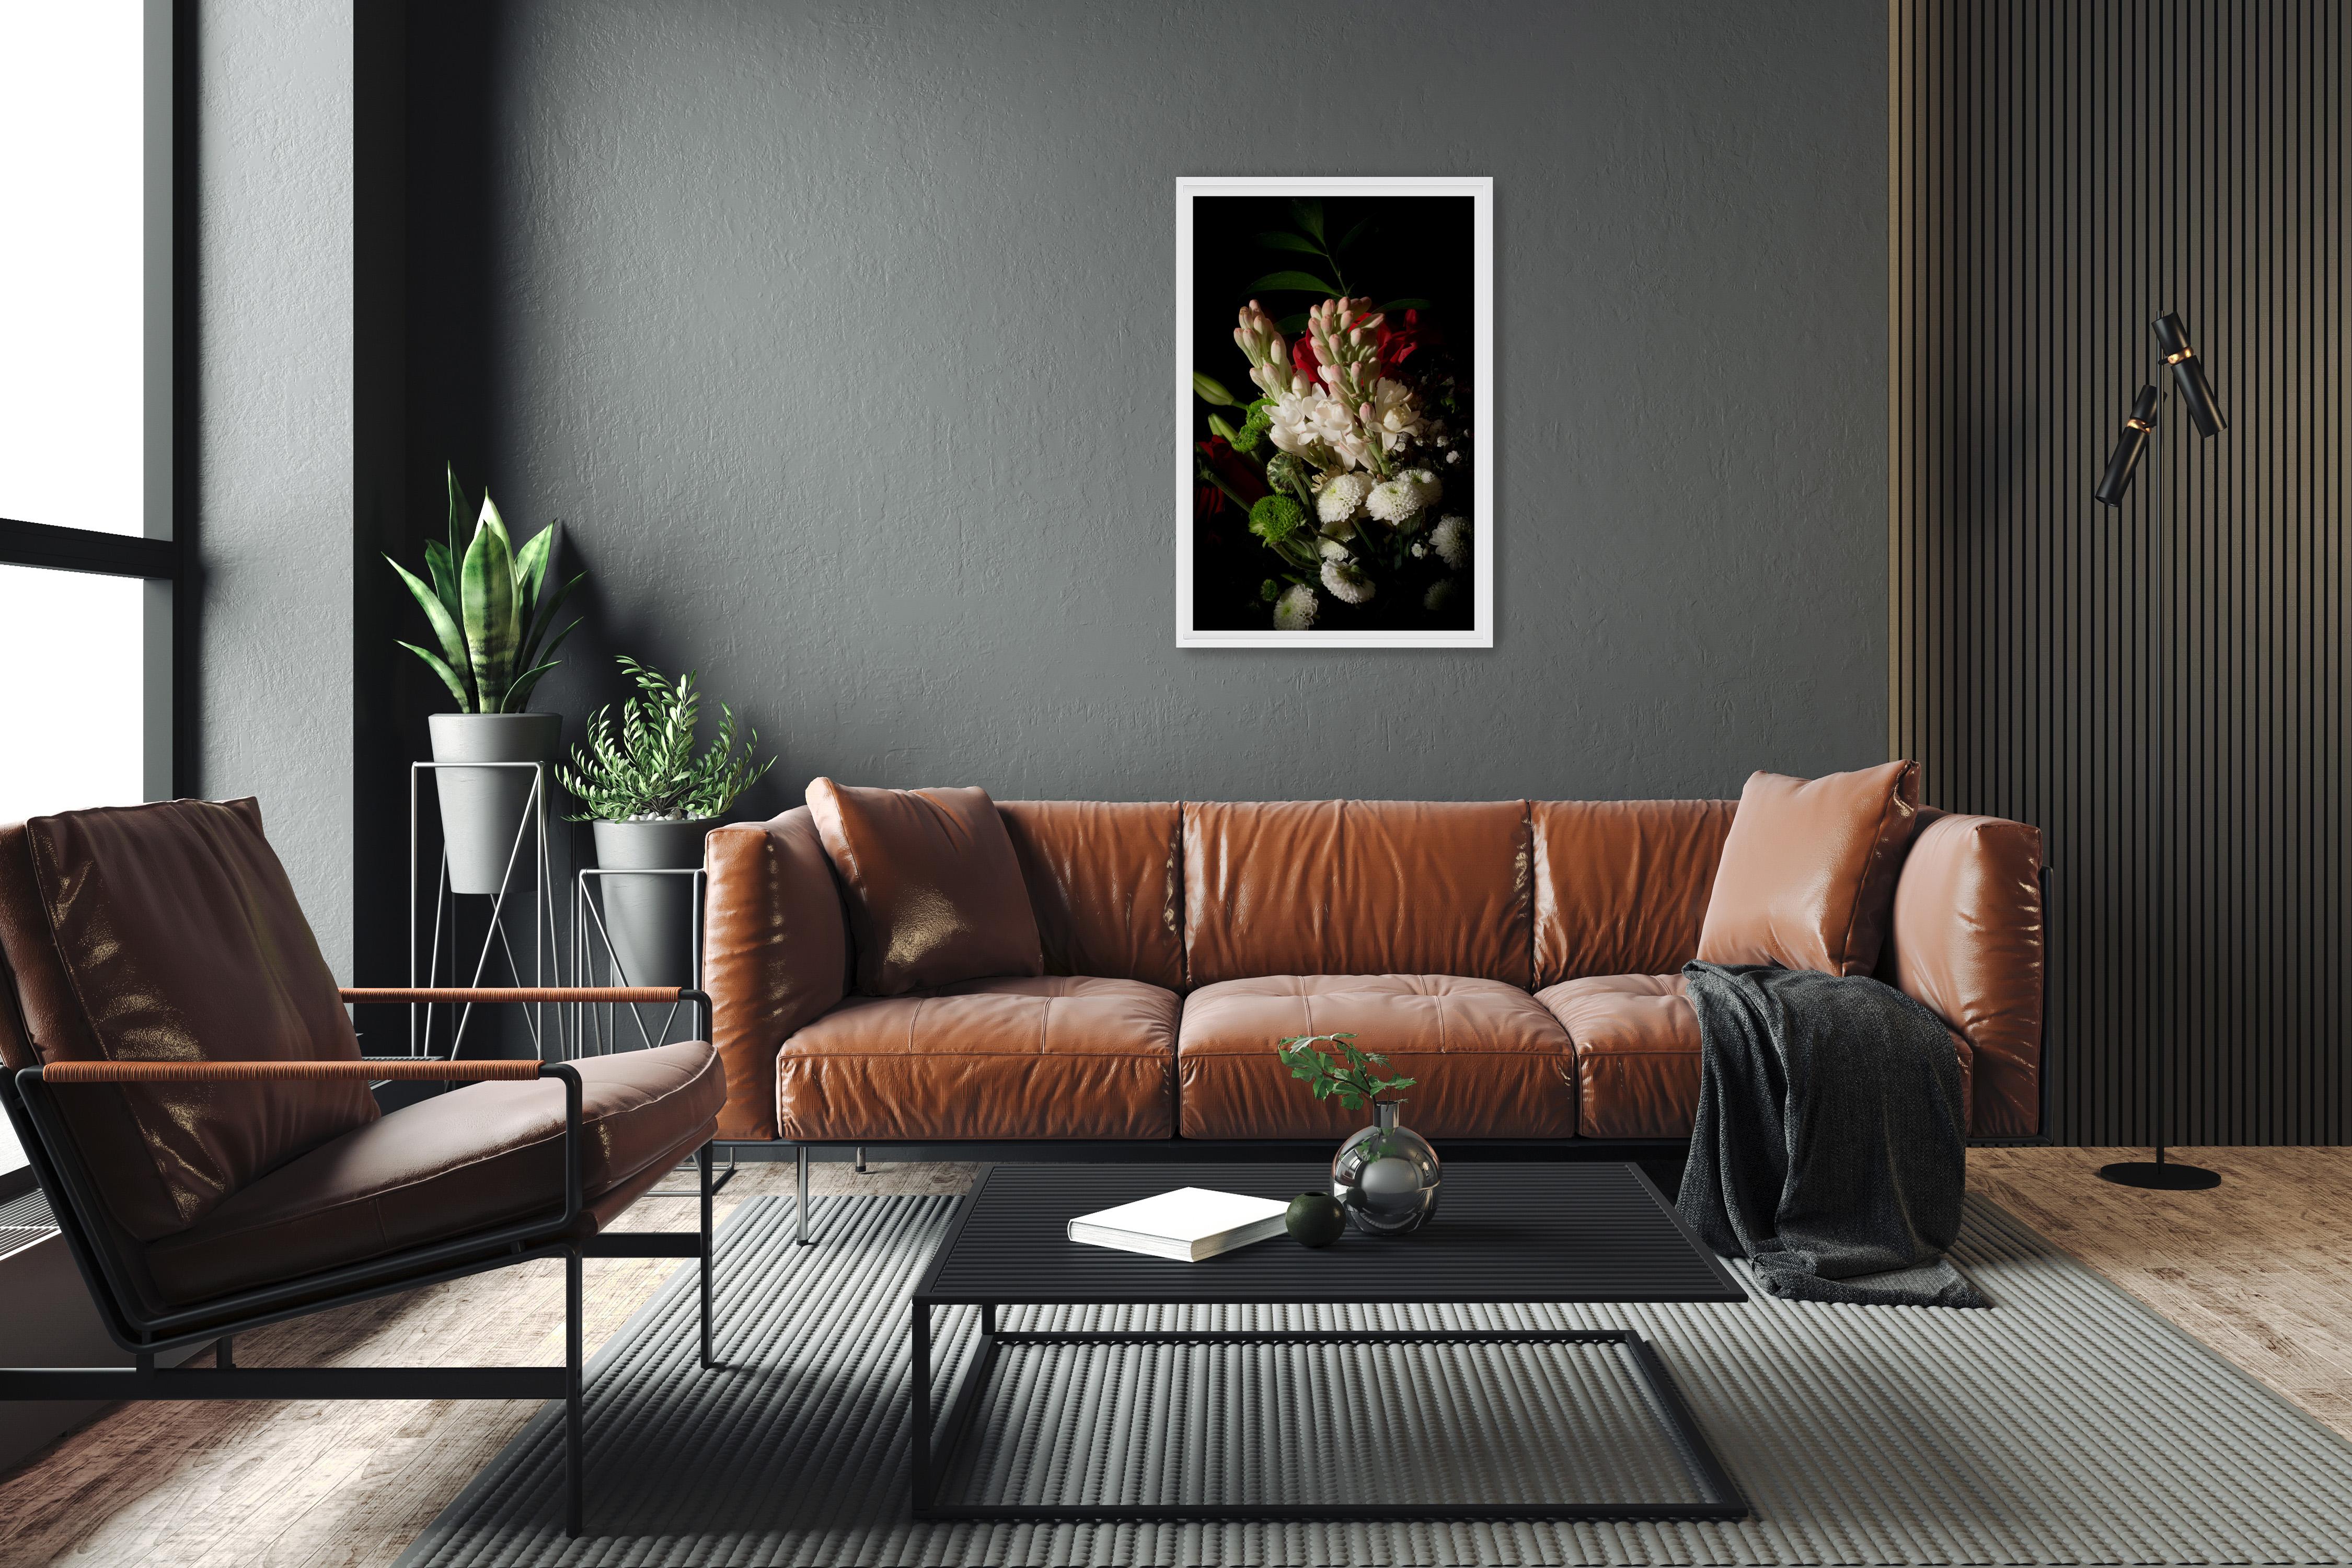 Flowers with Caravaggio Light, Still-Life Giclée Photo, Baroque Bouquet, Limited - Black Landscape Photograph by Kind of Cyan